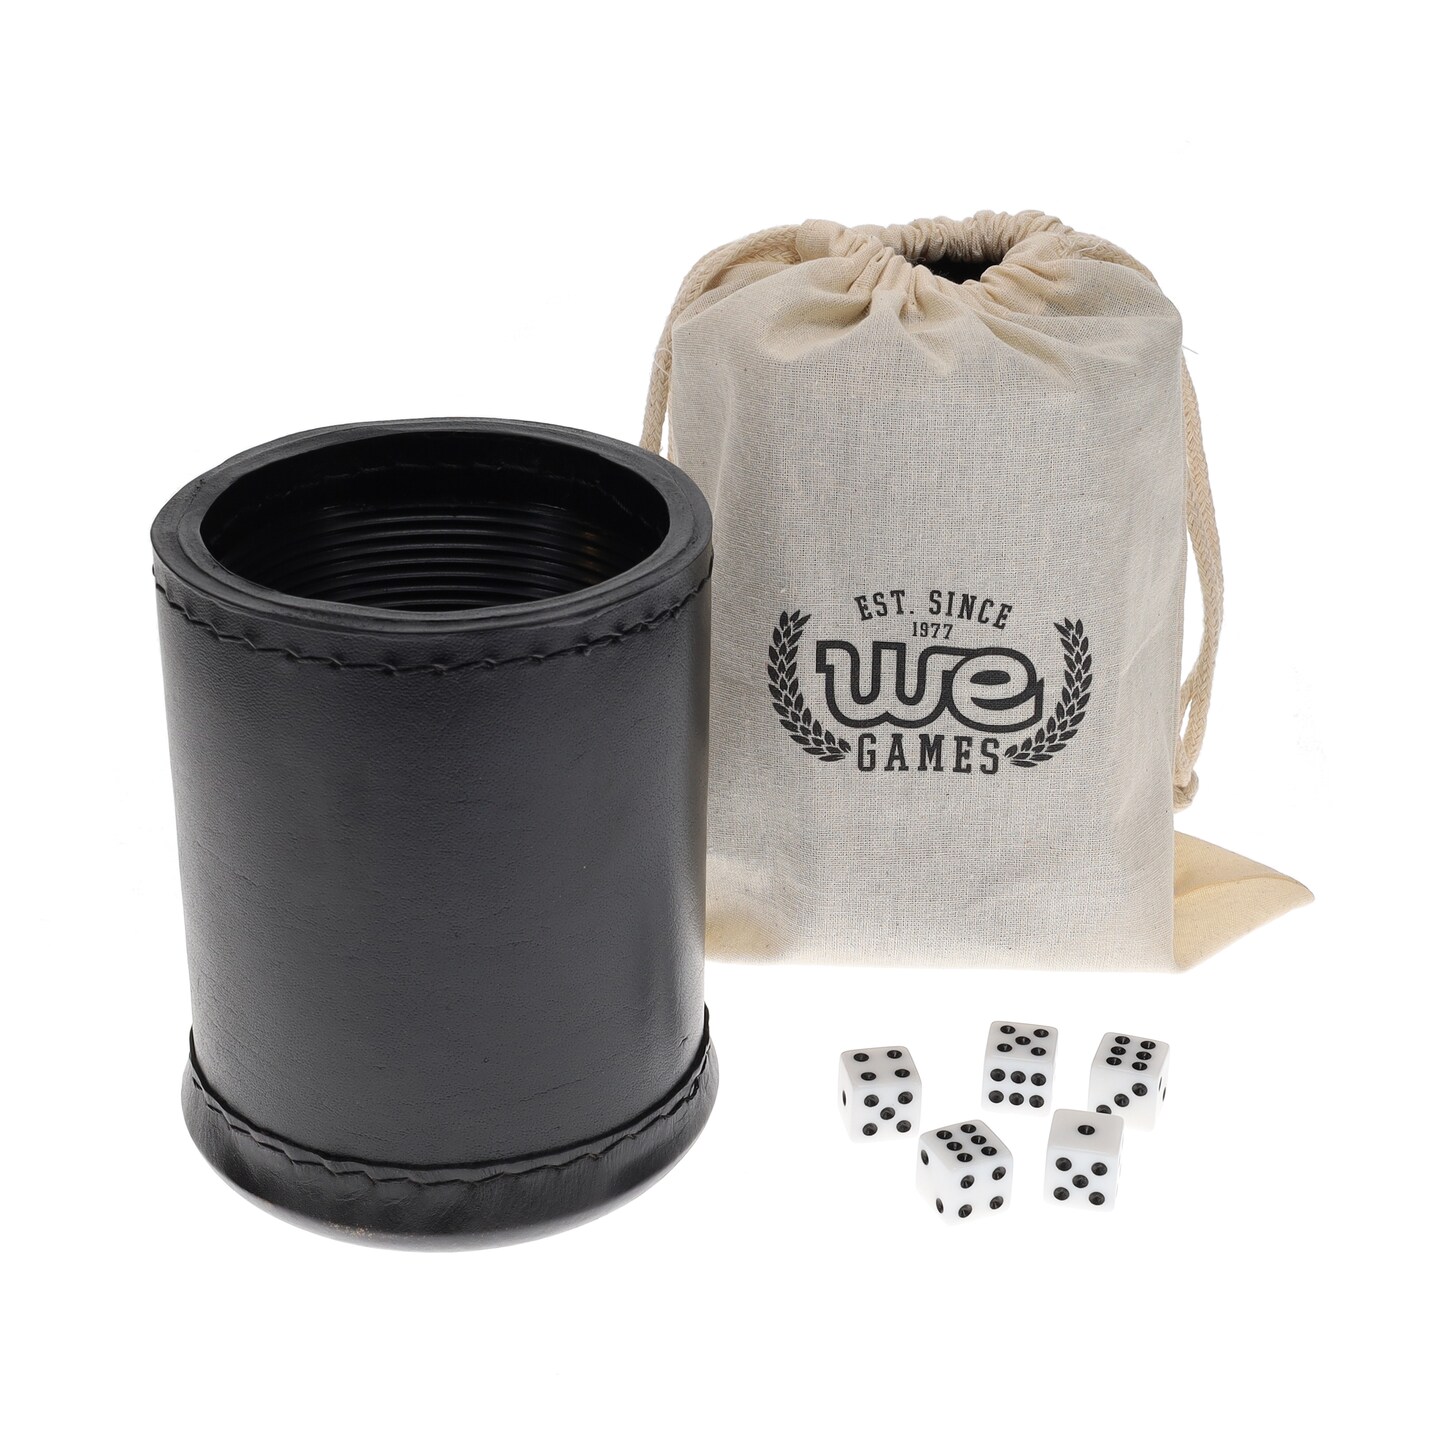 WE Games Professional, Leather Dice Cup Set - 5 Dice, Instructions for 10 Dice Games &#x26; Cloth Carry Bag